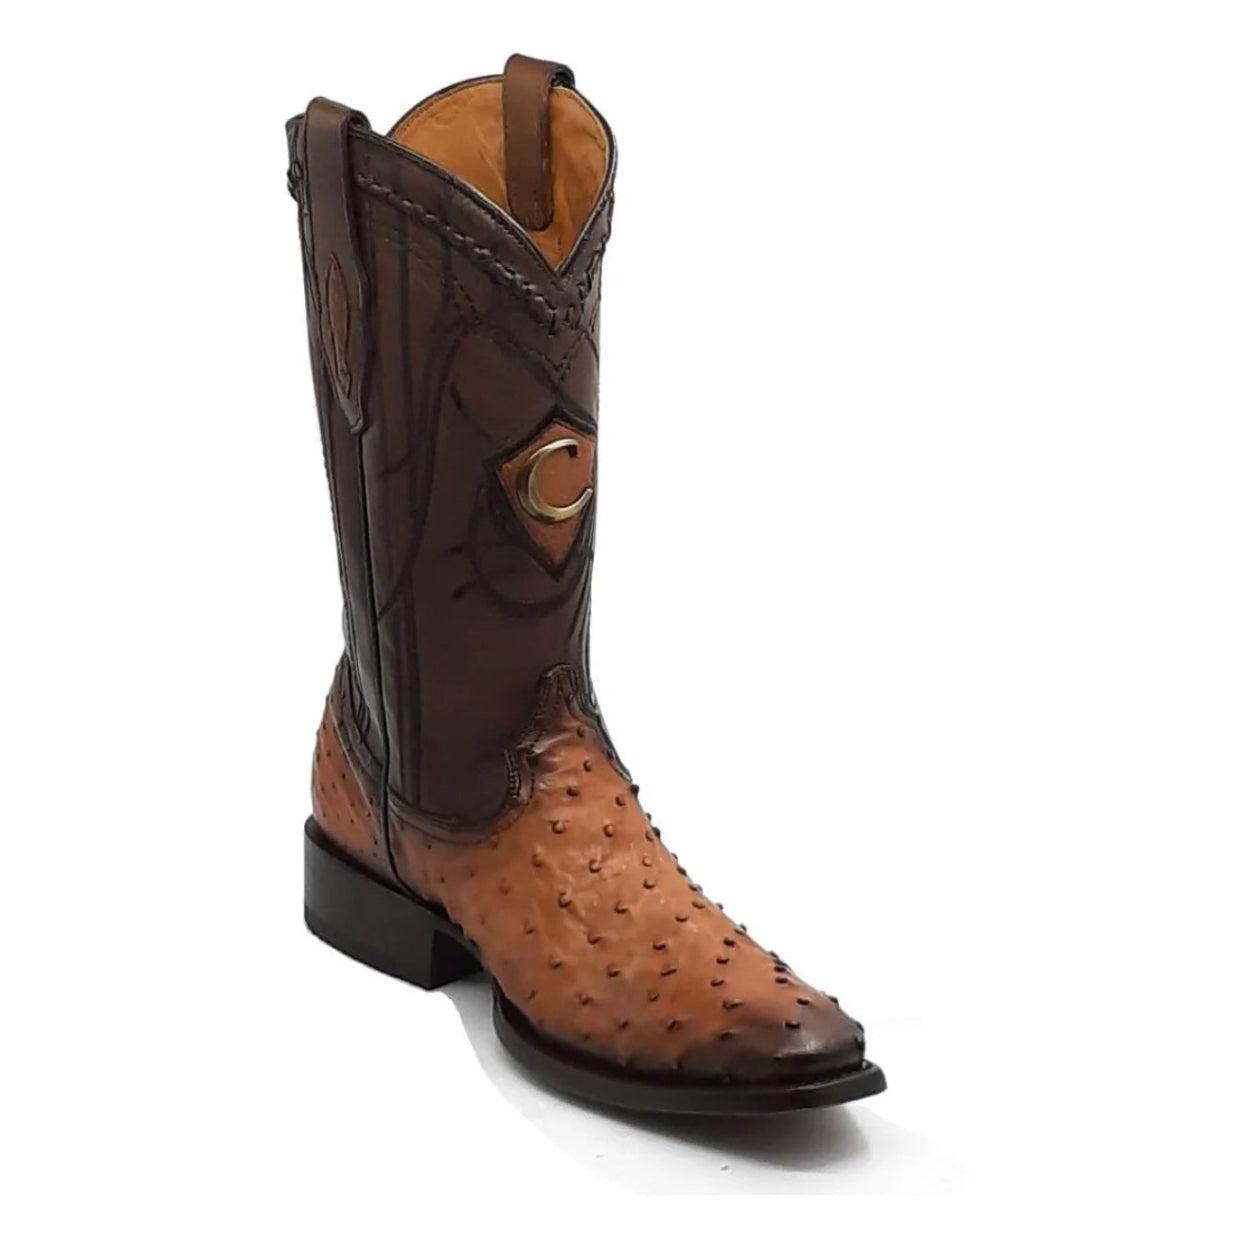 3C1NA1 - Cuadra brandy dress cowboy exotic ostrich leather boots for men-Kuet.us